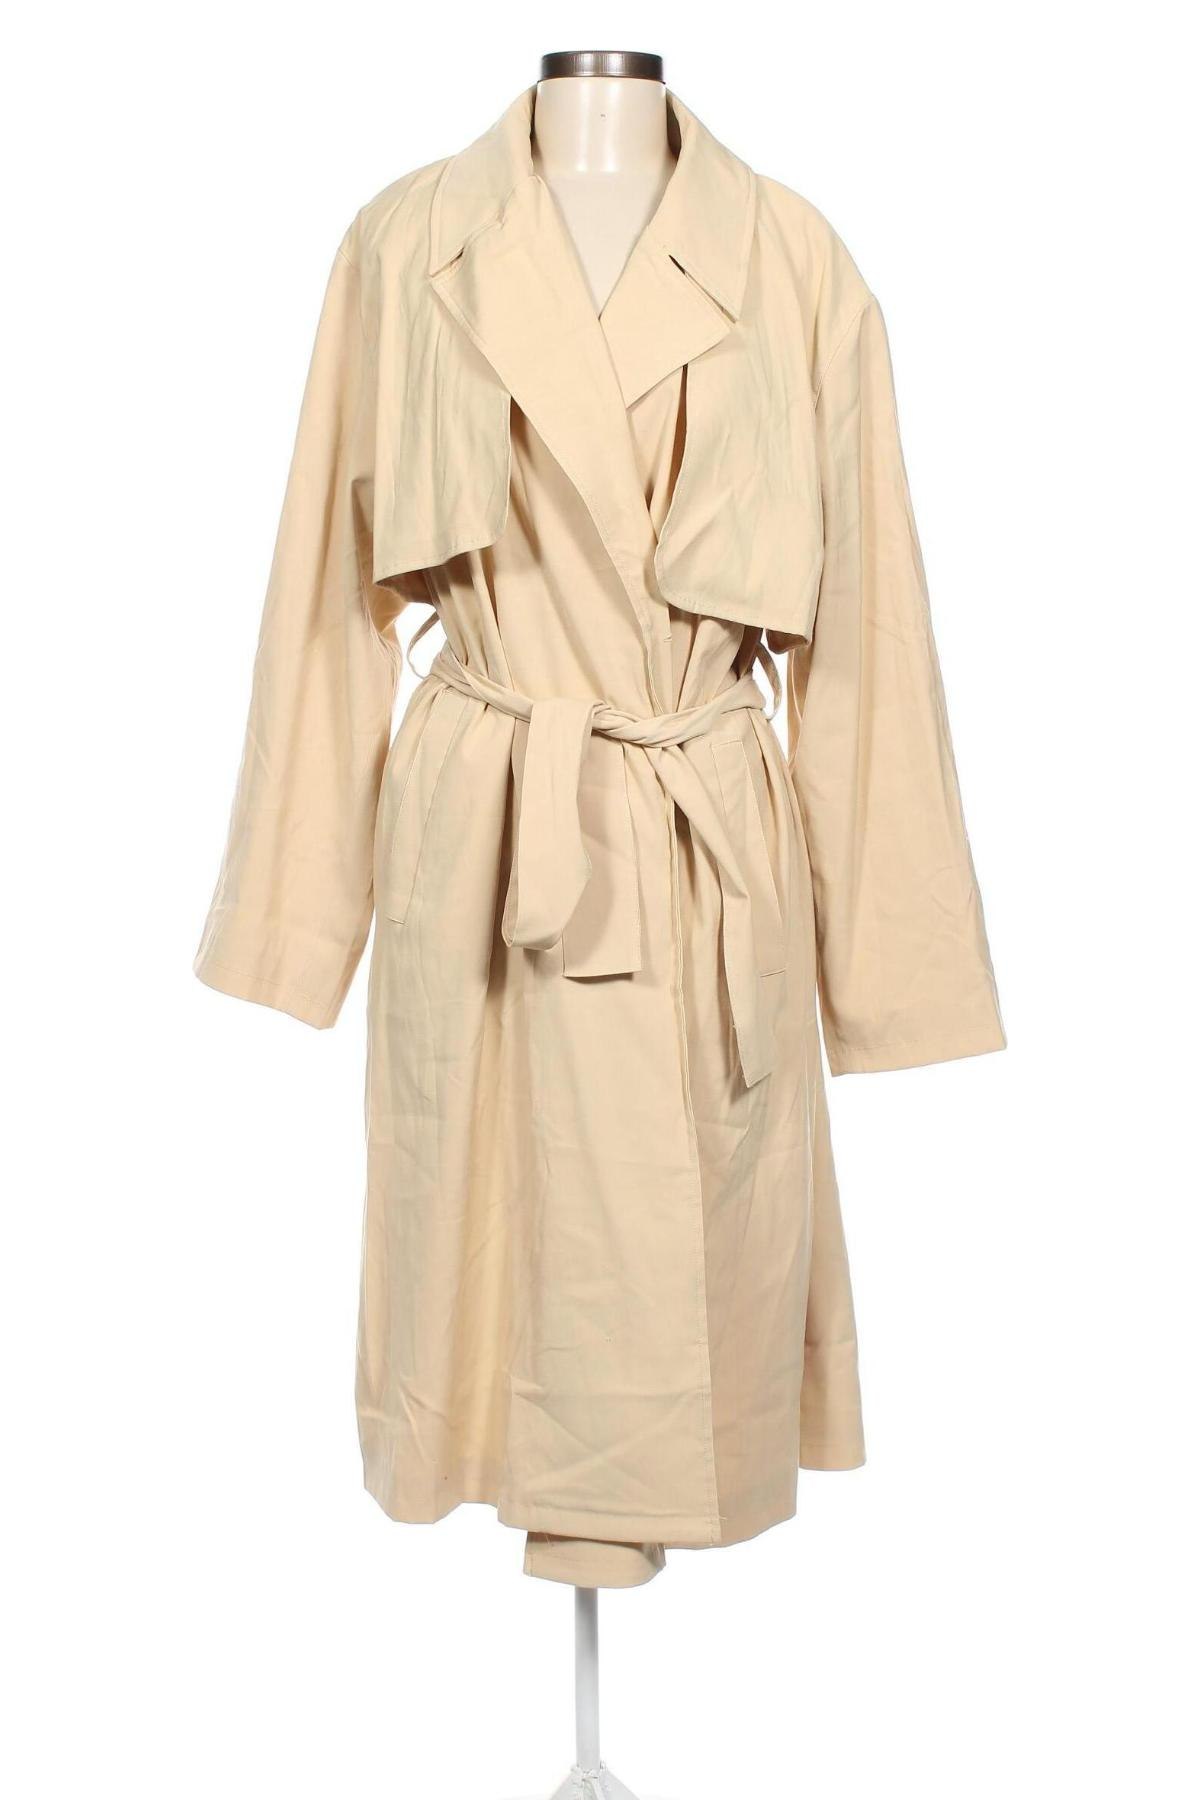 Damen Trenchcoat Katy Perry exclusive for ABOUT YOU, Größe M, Farbe Beige, Preis 115,98 €